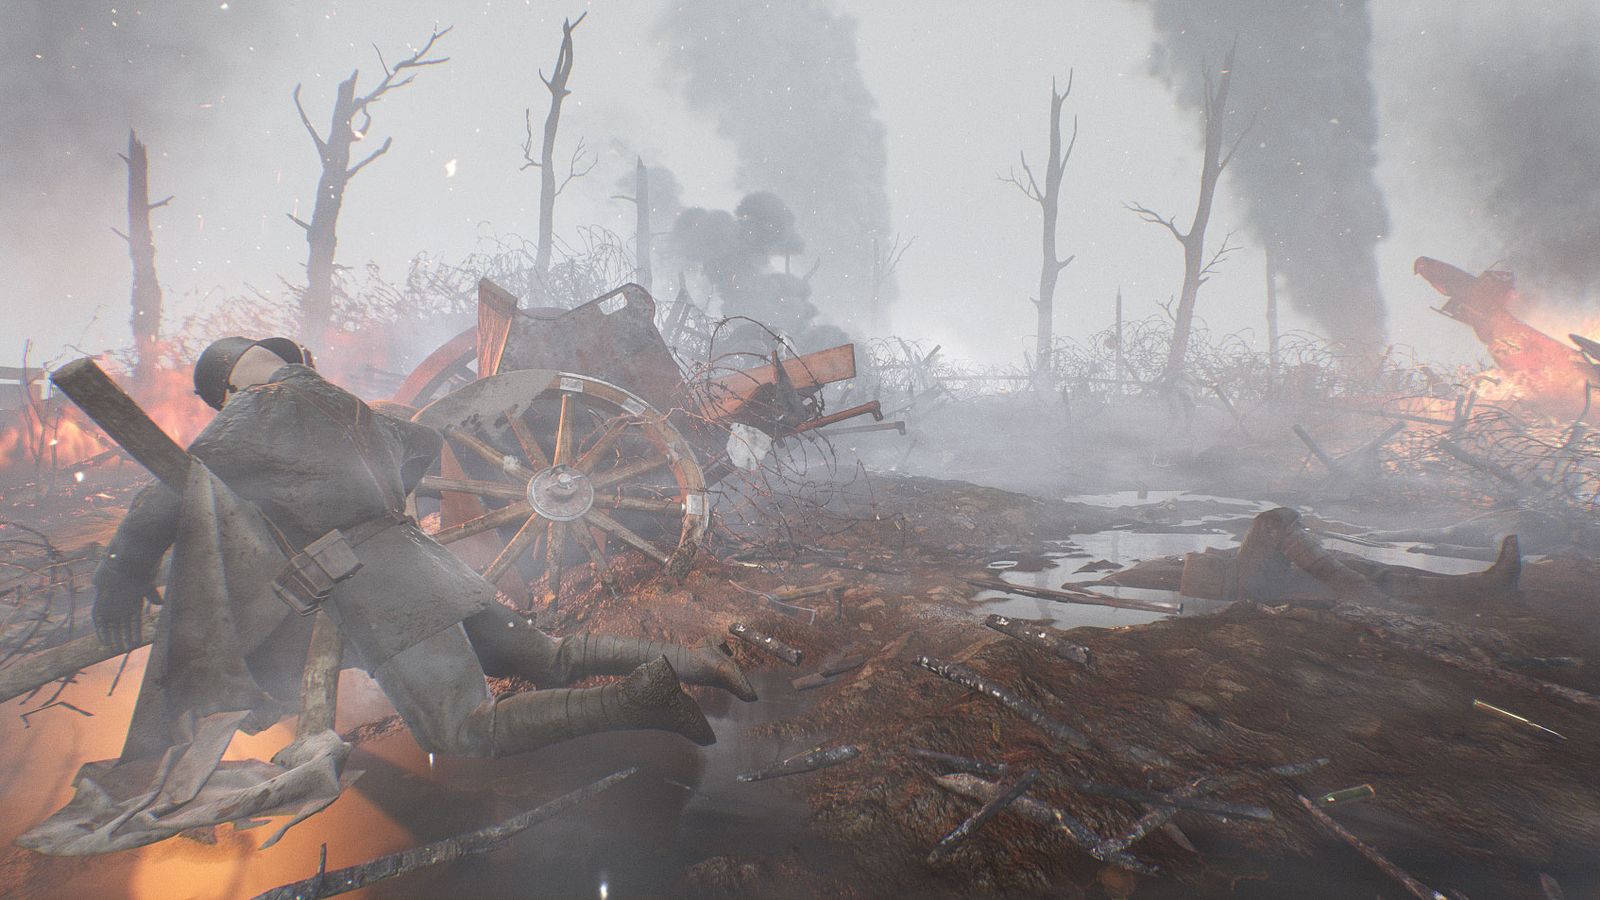 Ad Infinitum is a survival horror set in the trenches of WW1